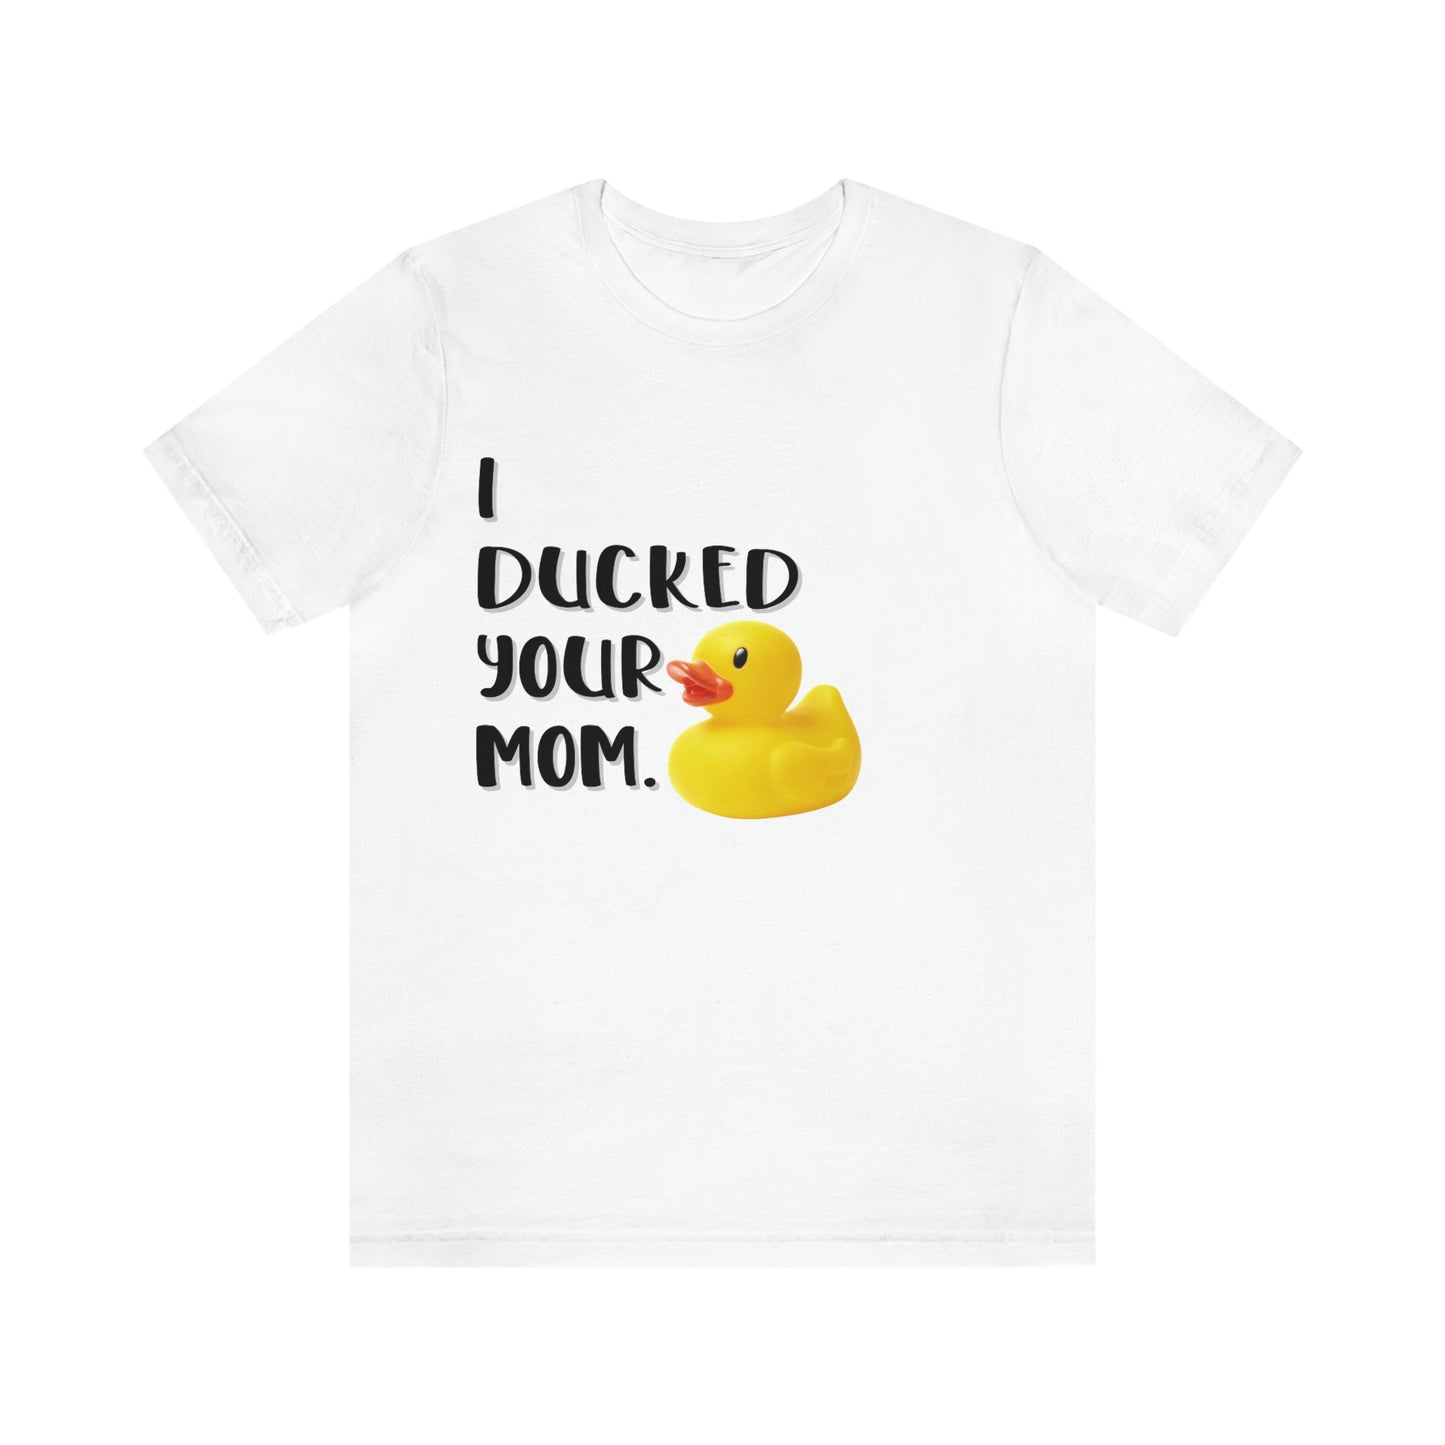 I Ducked Your Mom Graphic Unisex Short Sleeve T-Shirt